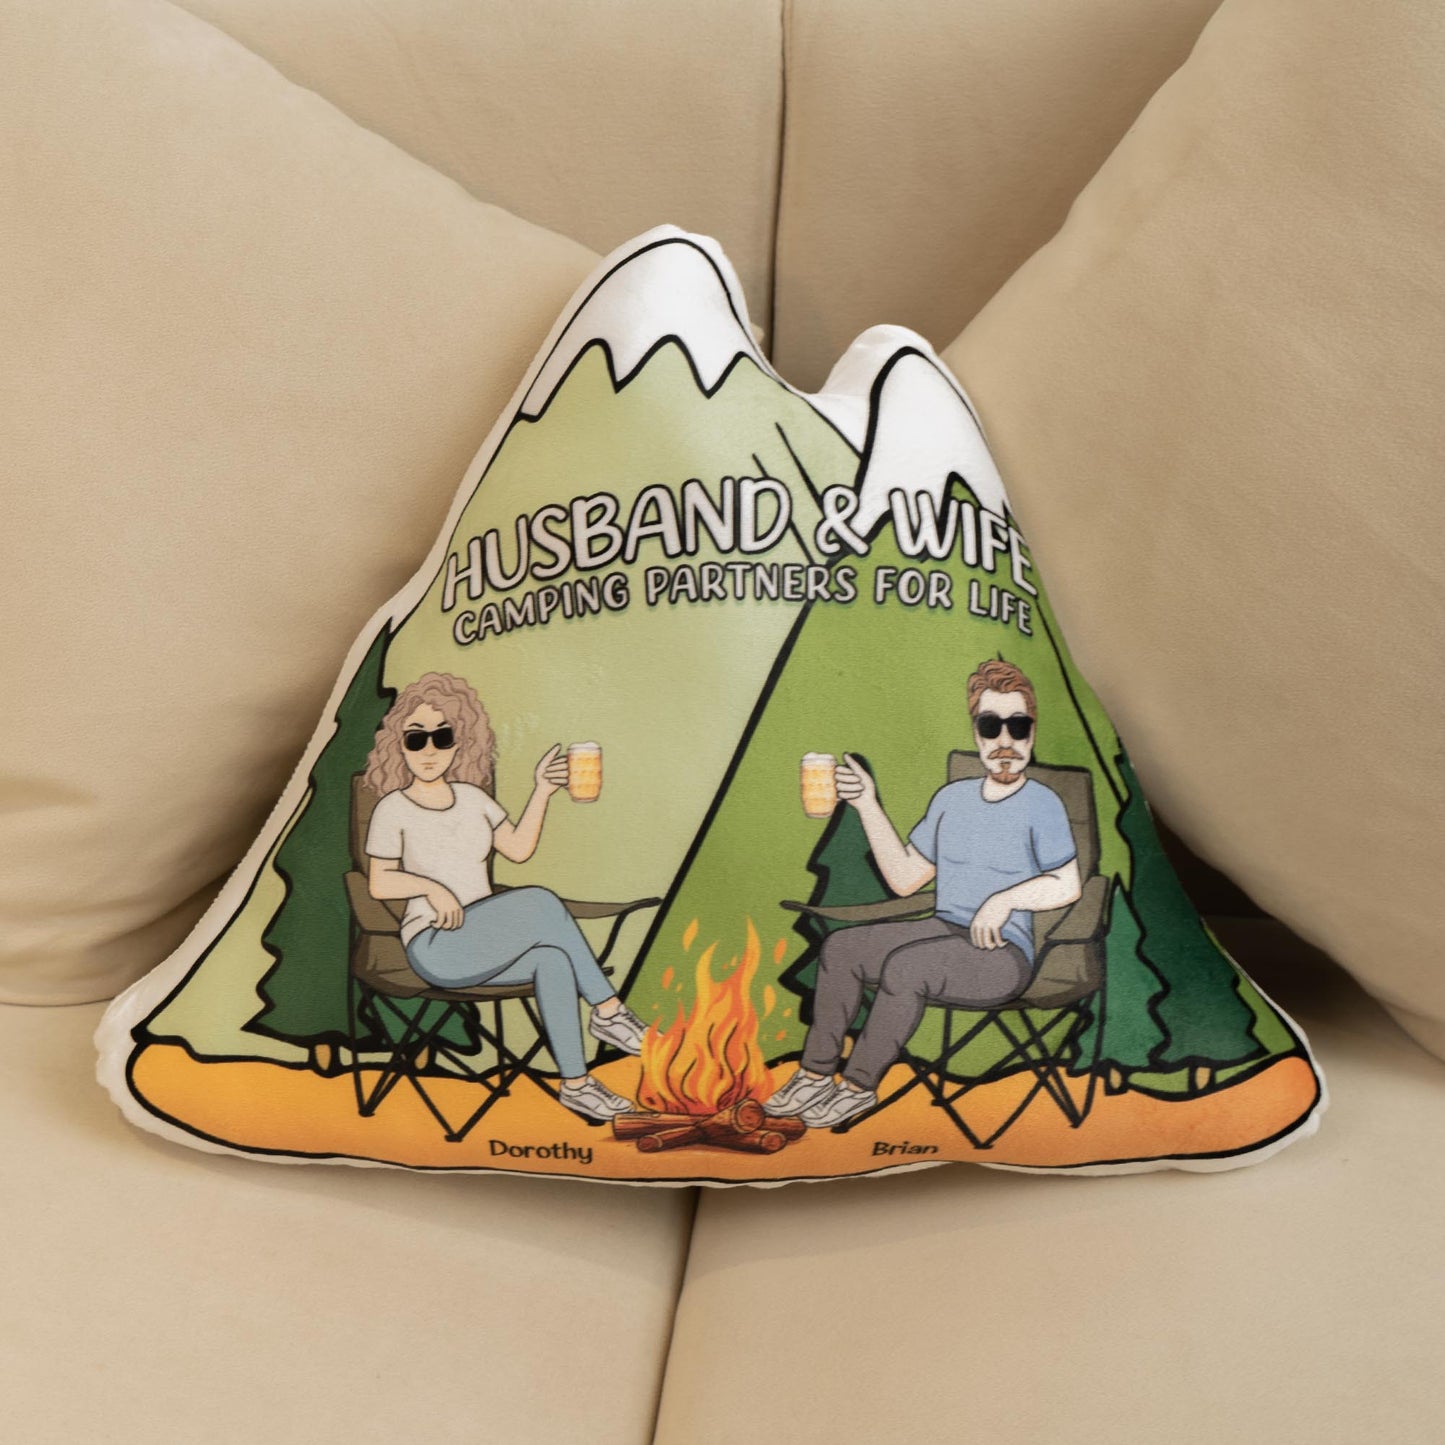 Husband And Wife Camping Partners For Life - Personalized Custom Shaped Pillow